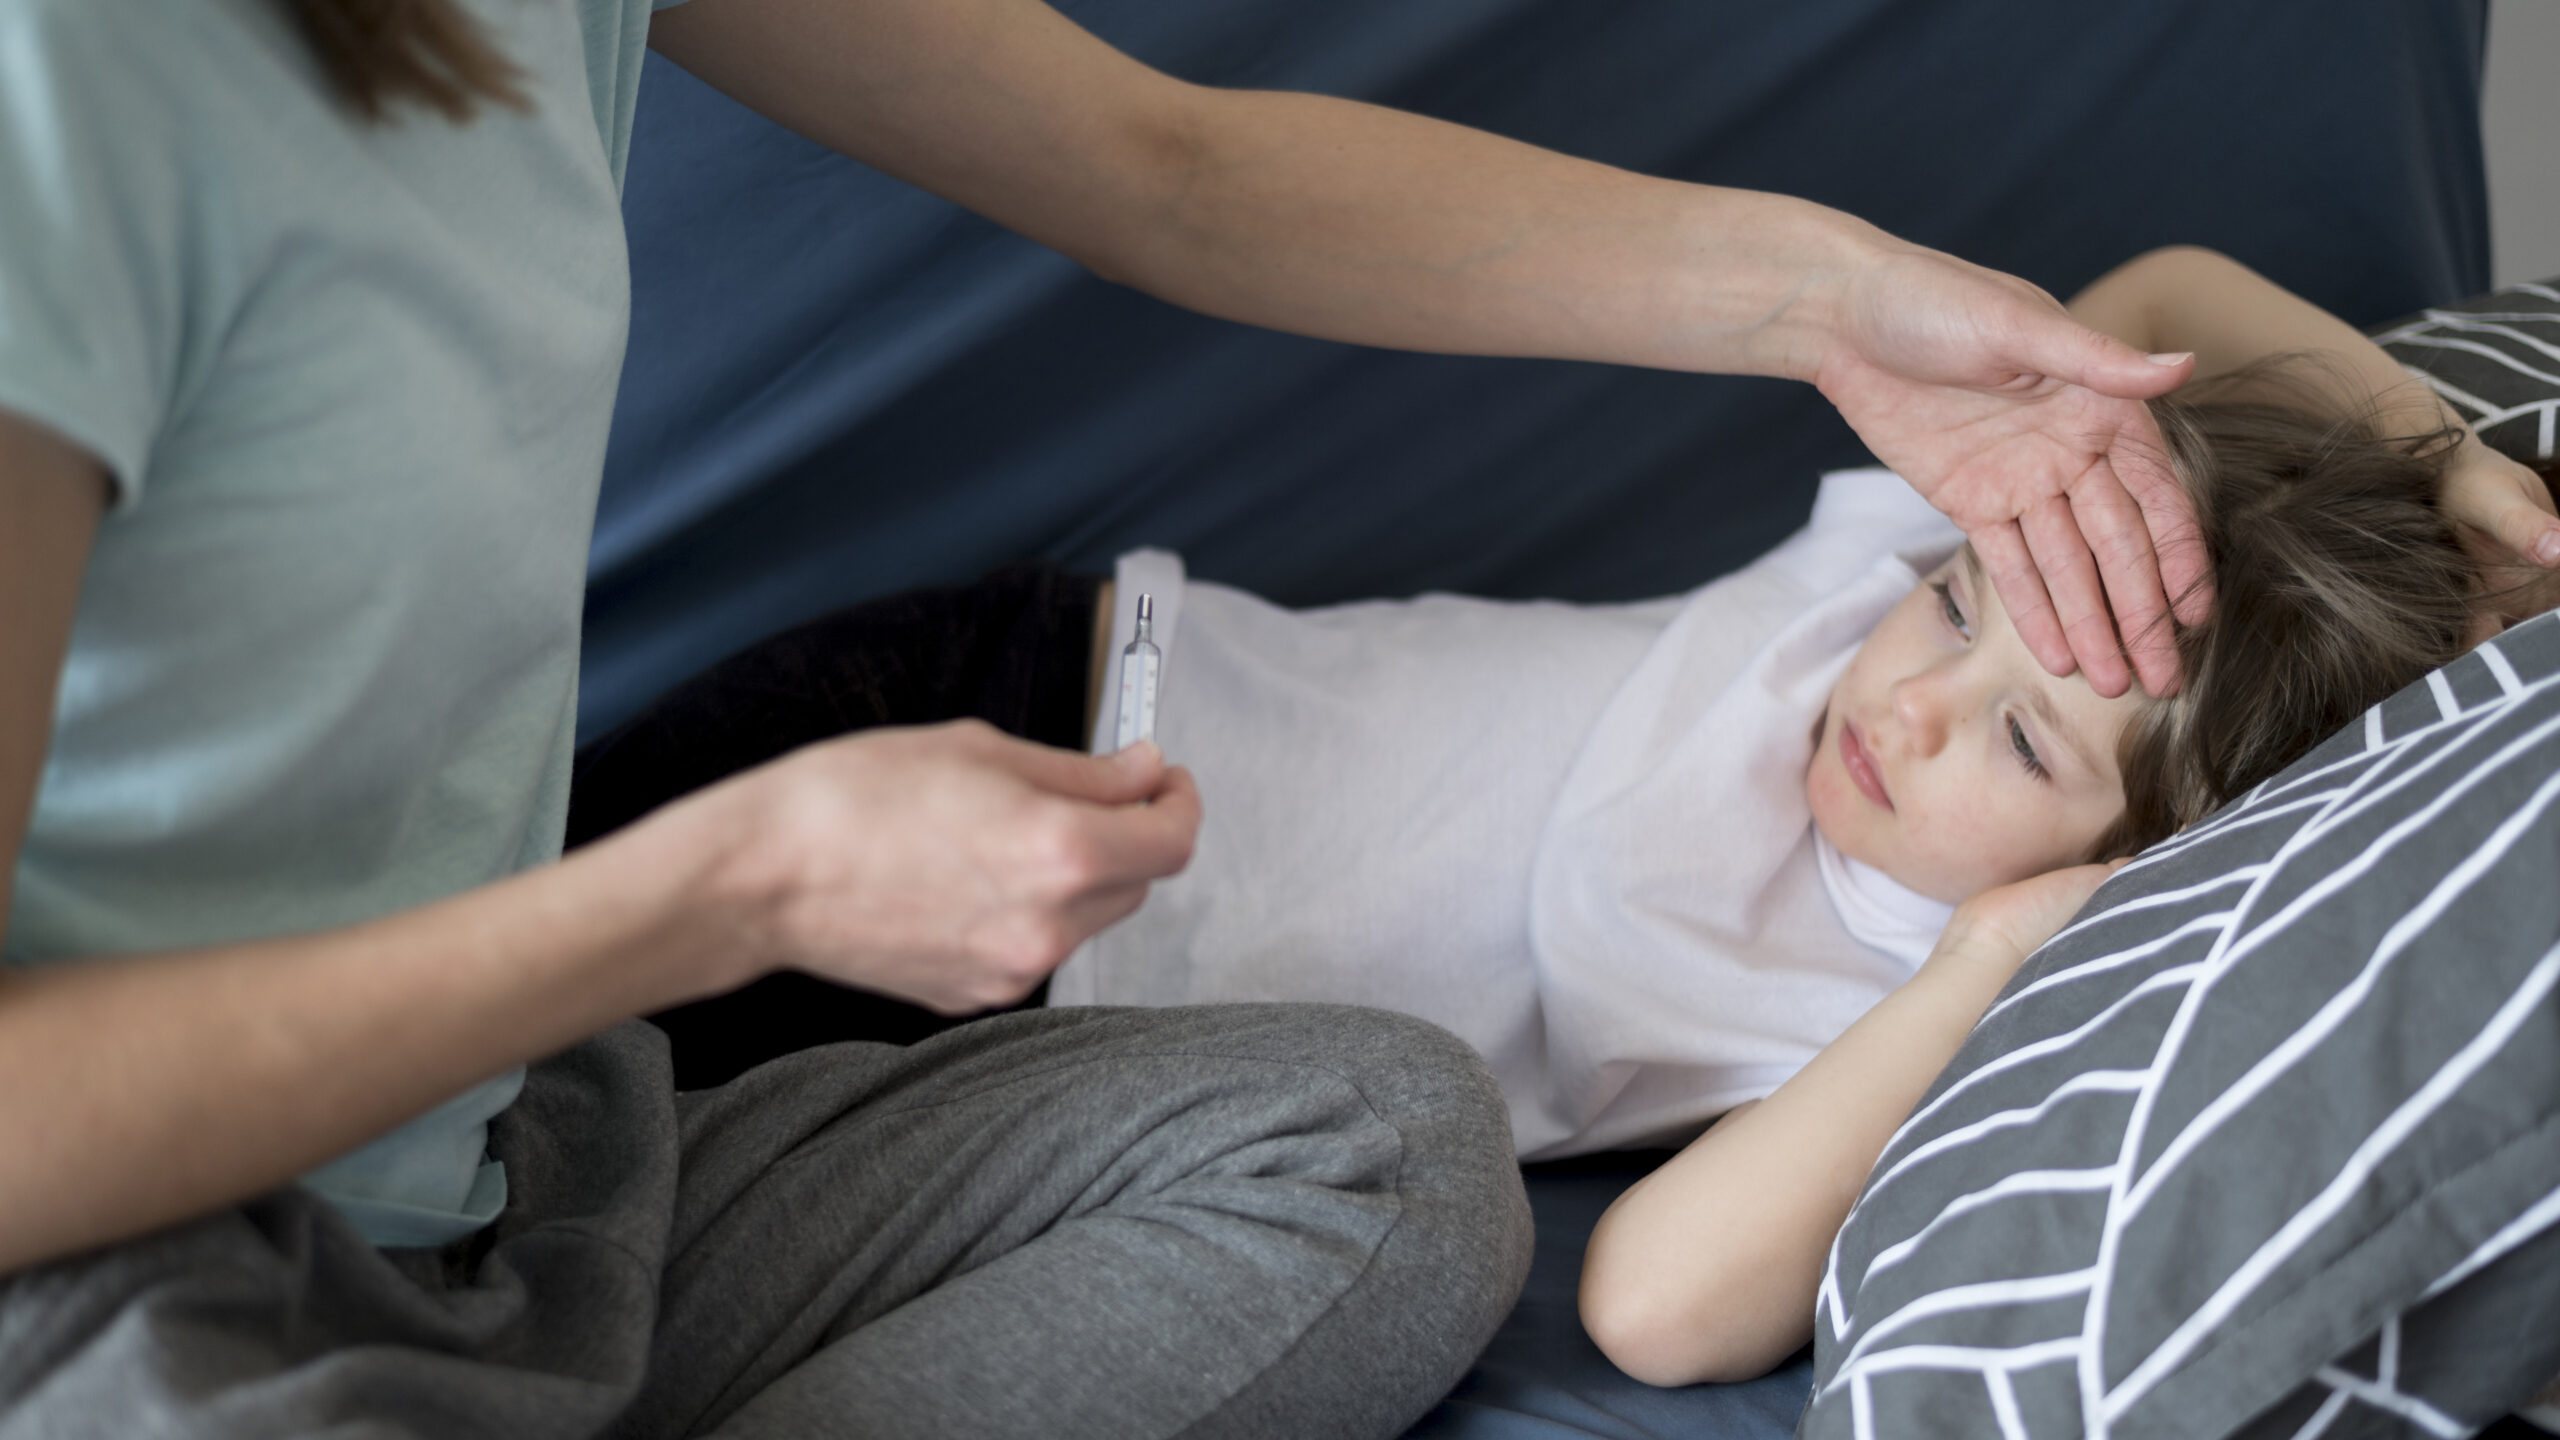 Fever in children: when to see a doctor